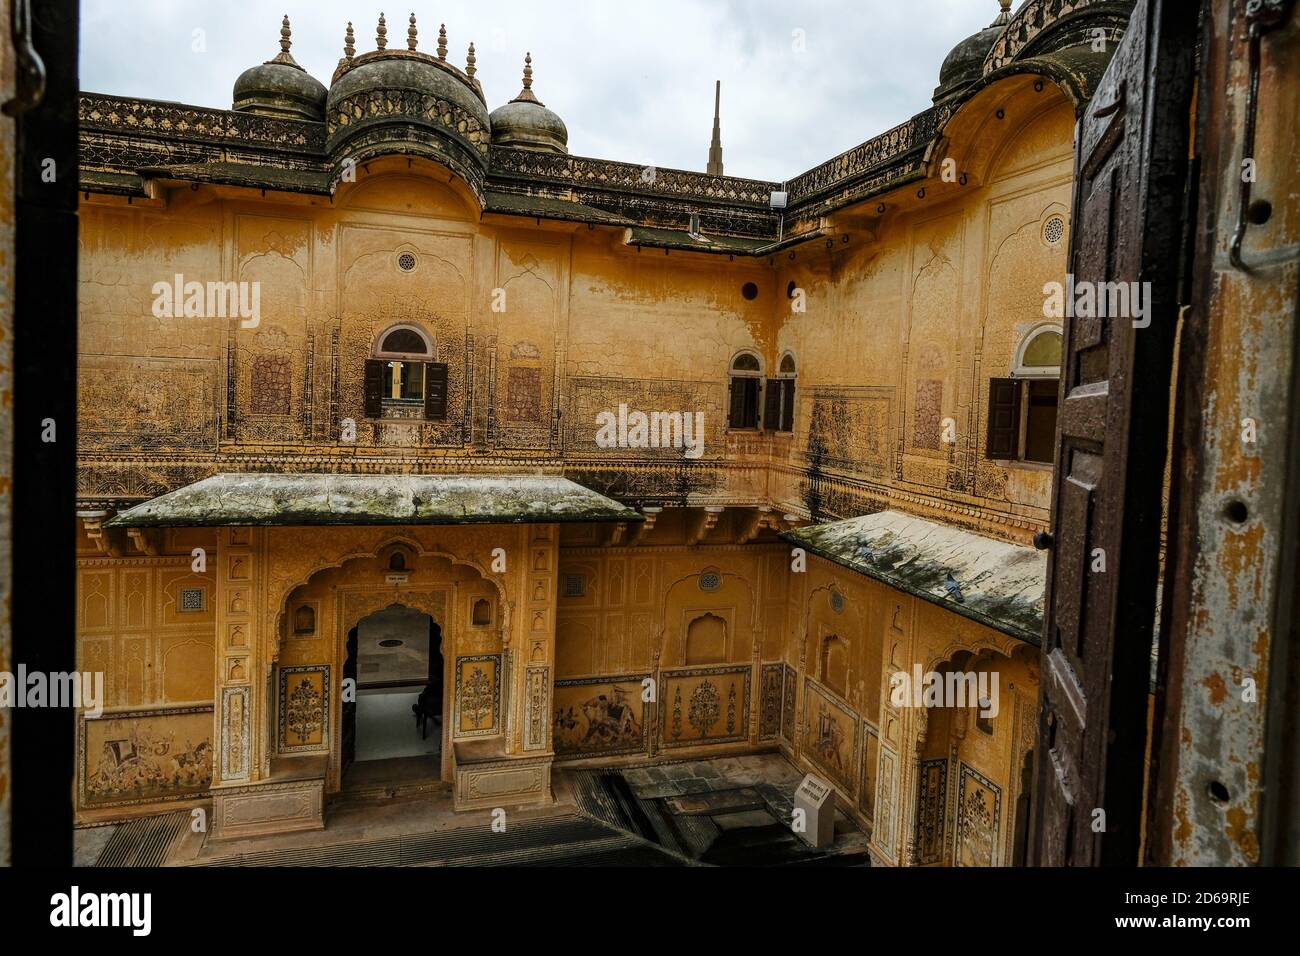 Jaipur, India - August 2020: View of the Nahargarh Fort, also known as Tiger Fort, in Jaipur on August 31, 2020 in Rajasthan, India. Stock Photo